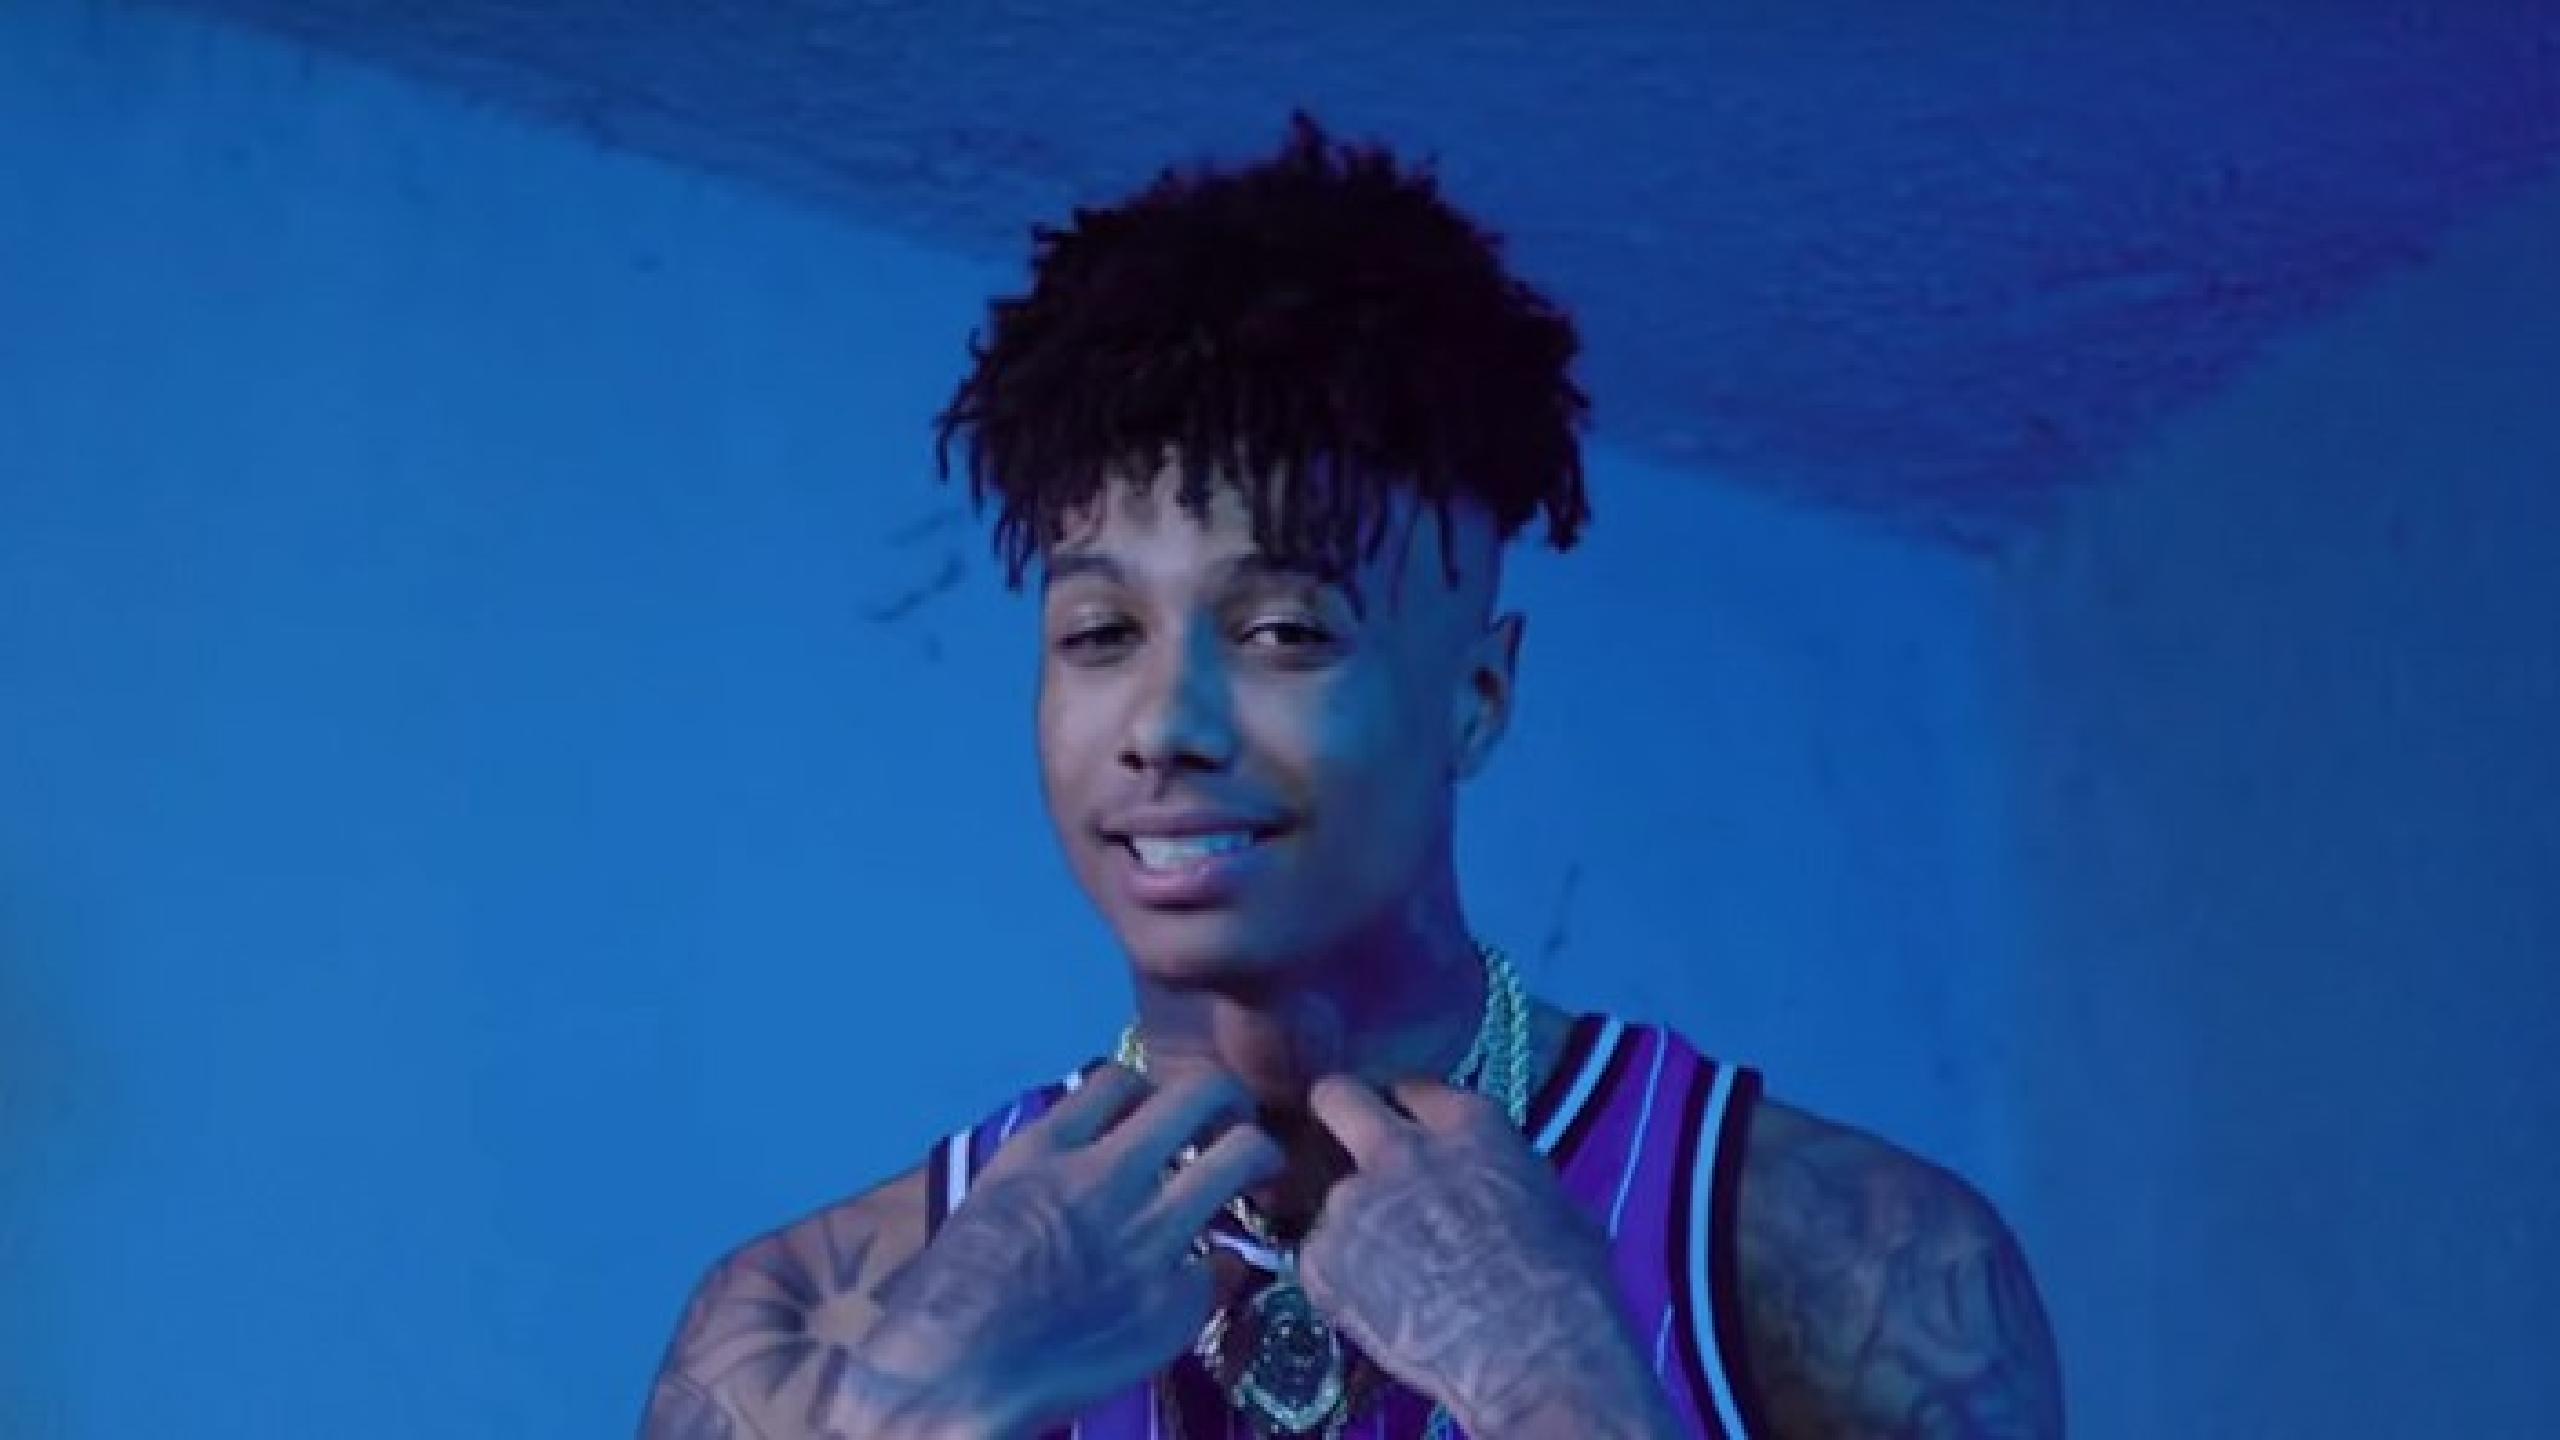 Blueface tour dates 2019 2020. Blueface tickets and concerts | Wegow United States2560 x 1440